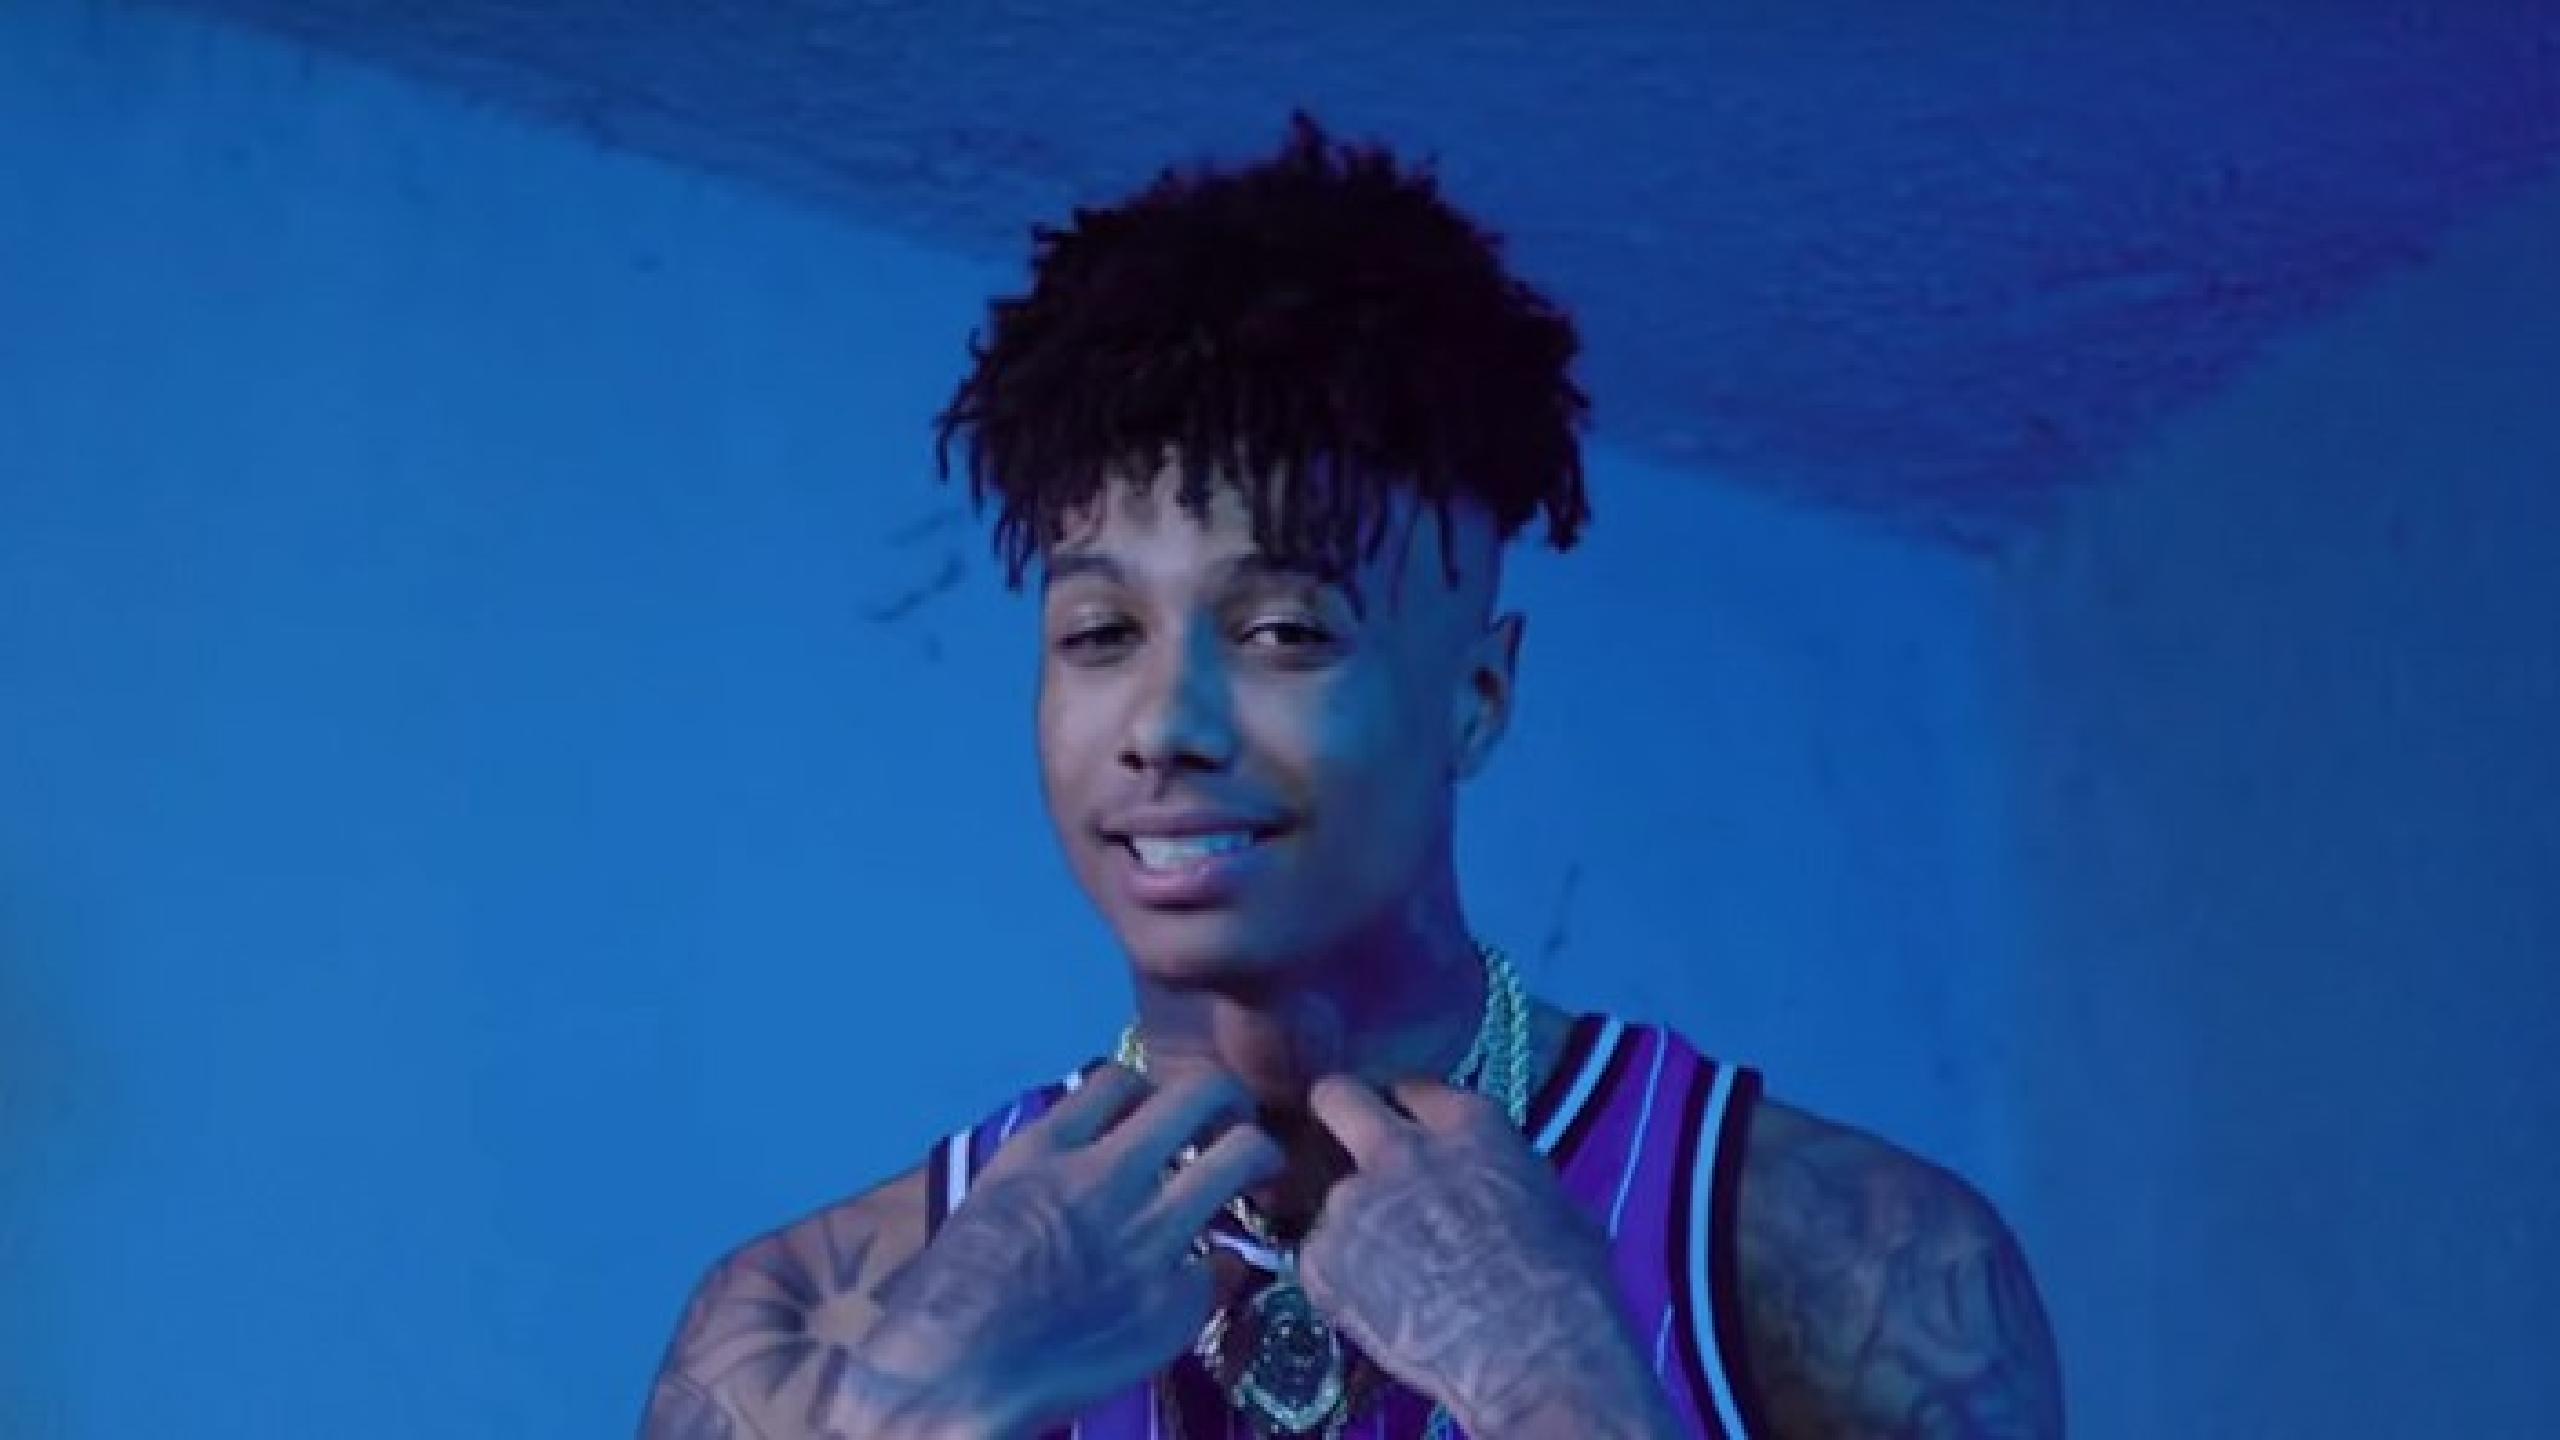 Blueface tour dates 2019 2020. Blueface tickets and concerts | Wegow United States2560 x 1440